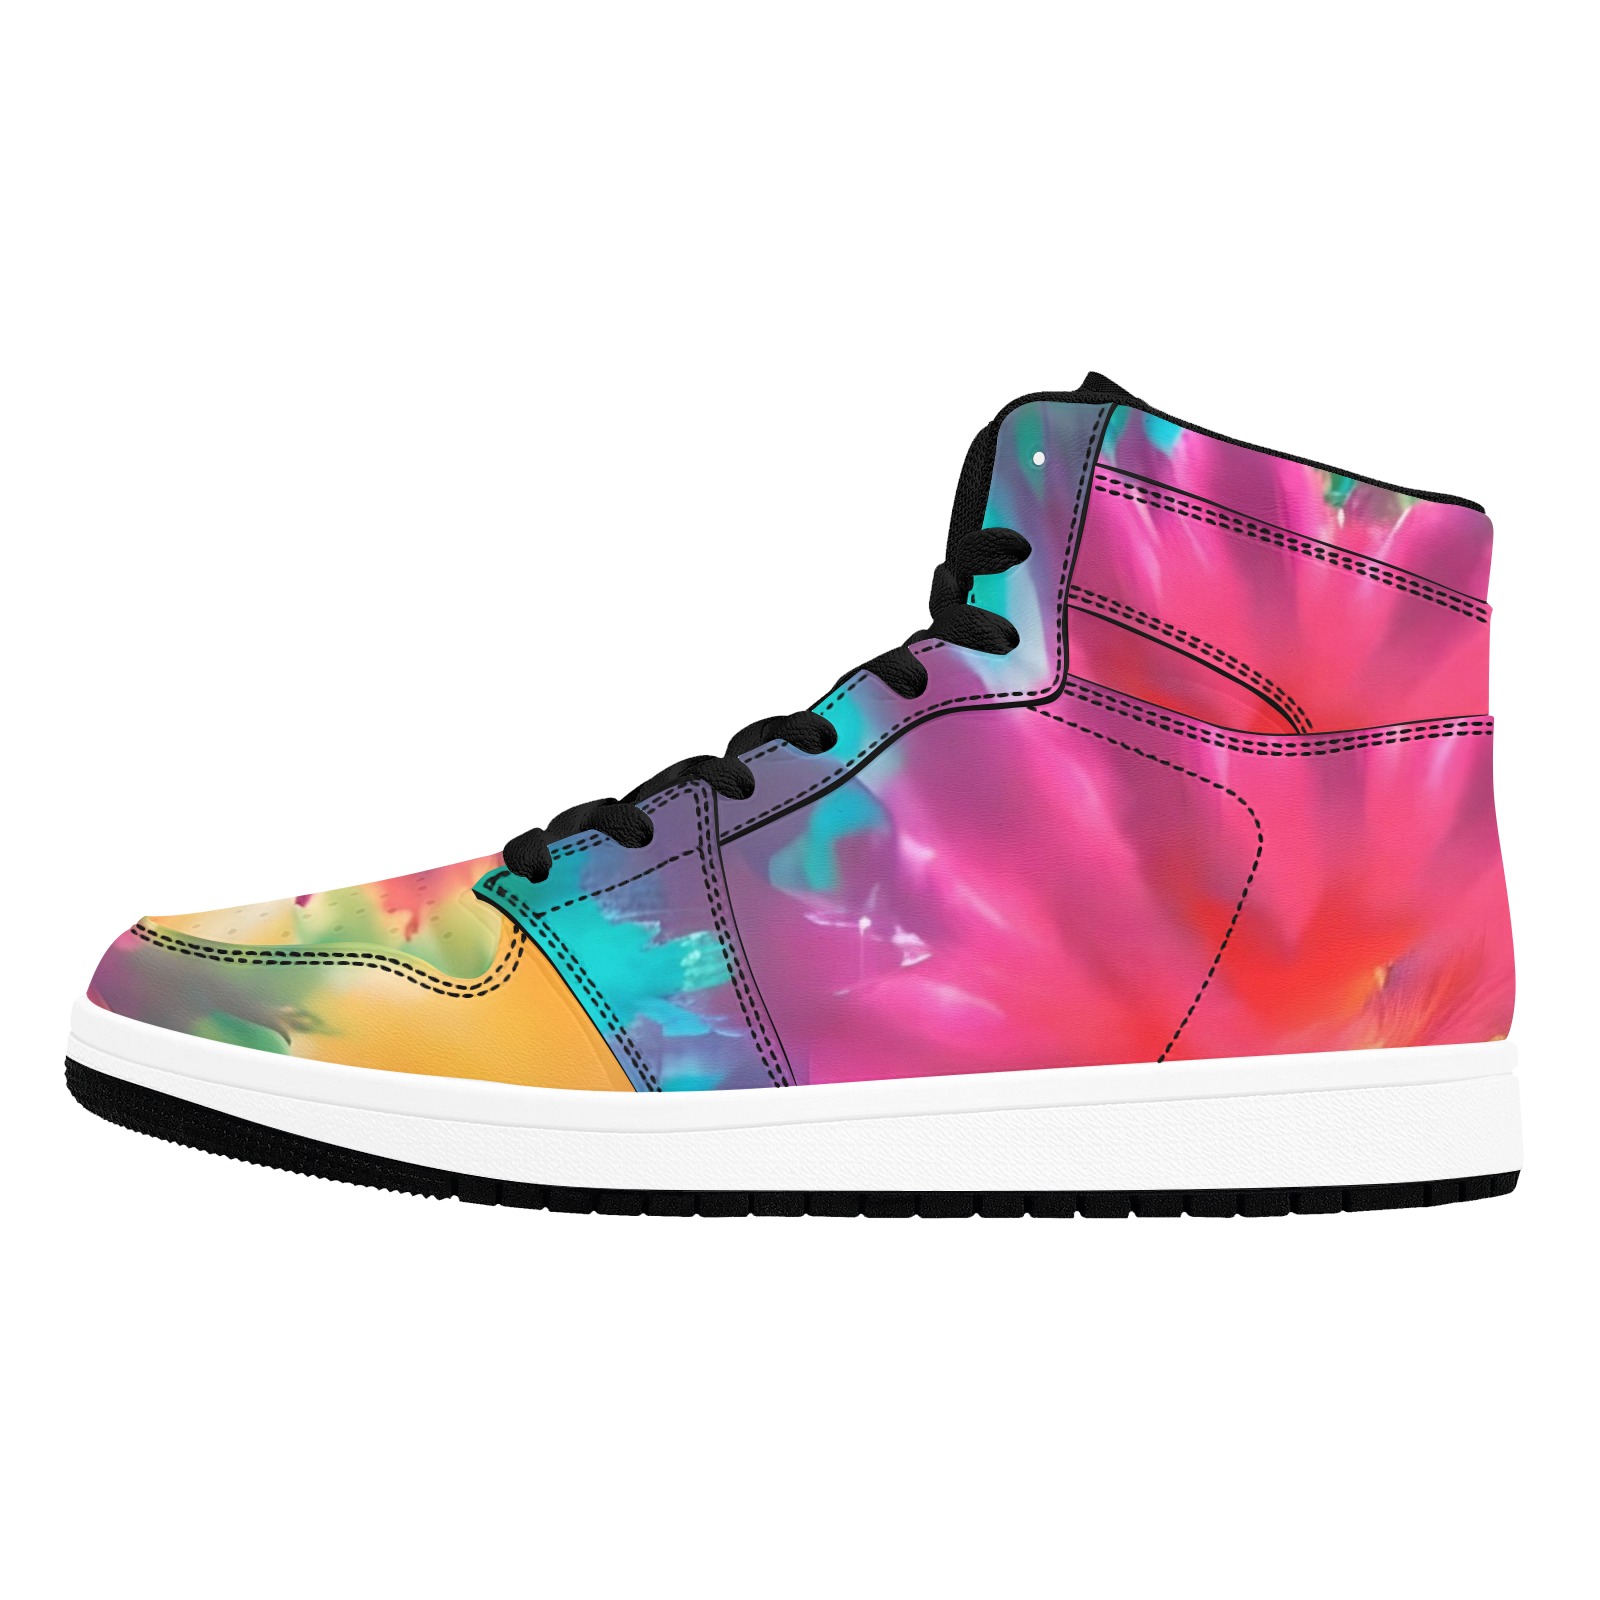 Colorful High Top Sneakers Watercolor High Top Sneakers Men's High Top Sneakers (Model 20042)